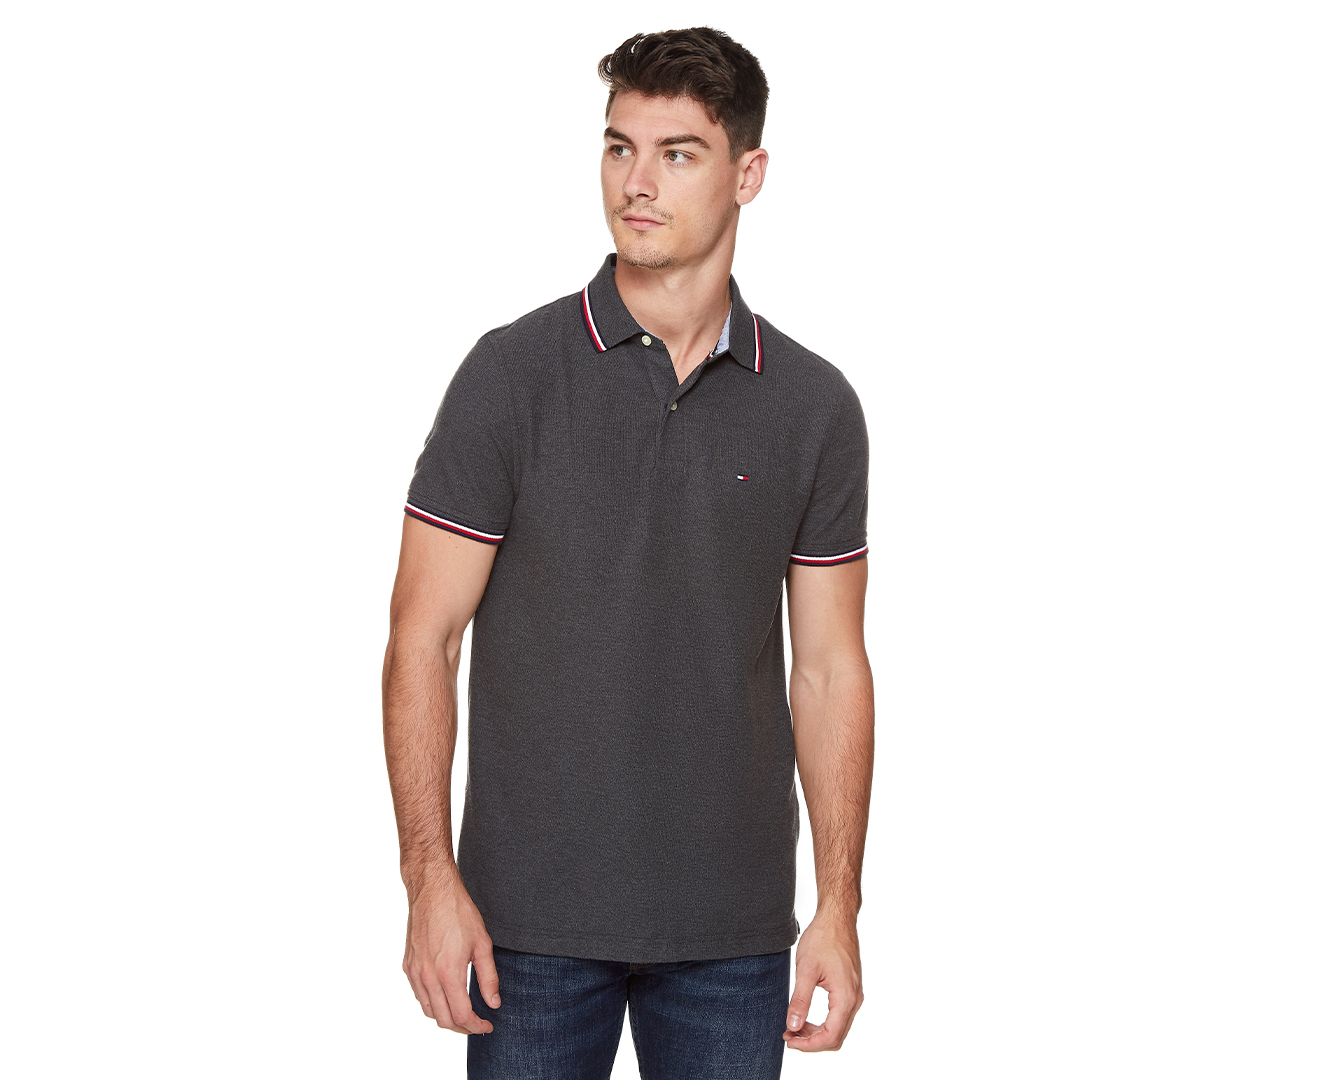 Tommy Hilfiger Men's Winston Solid Wicking Polo Shirt - Charcoal Grey ...